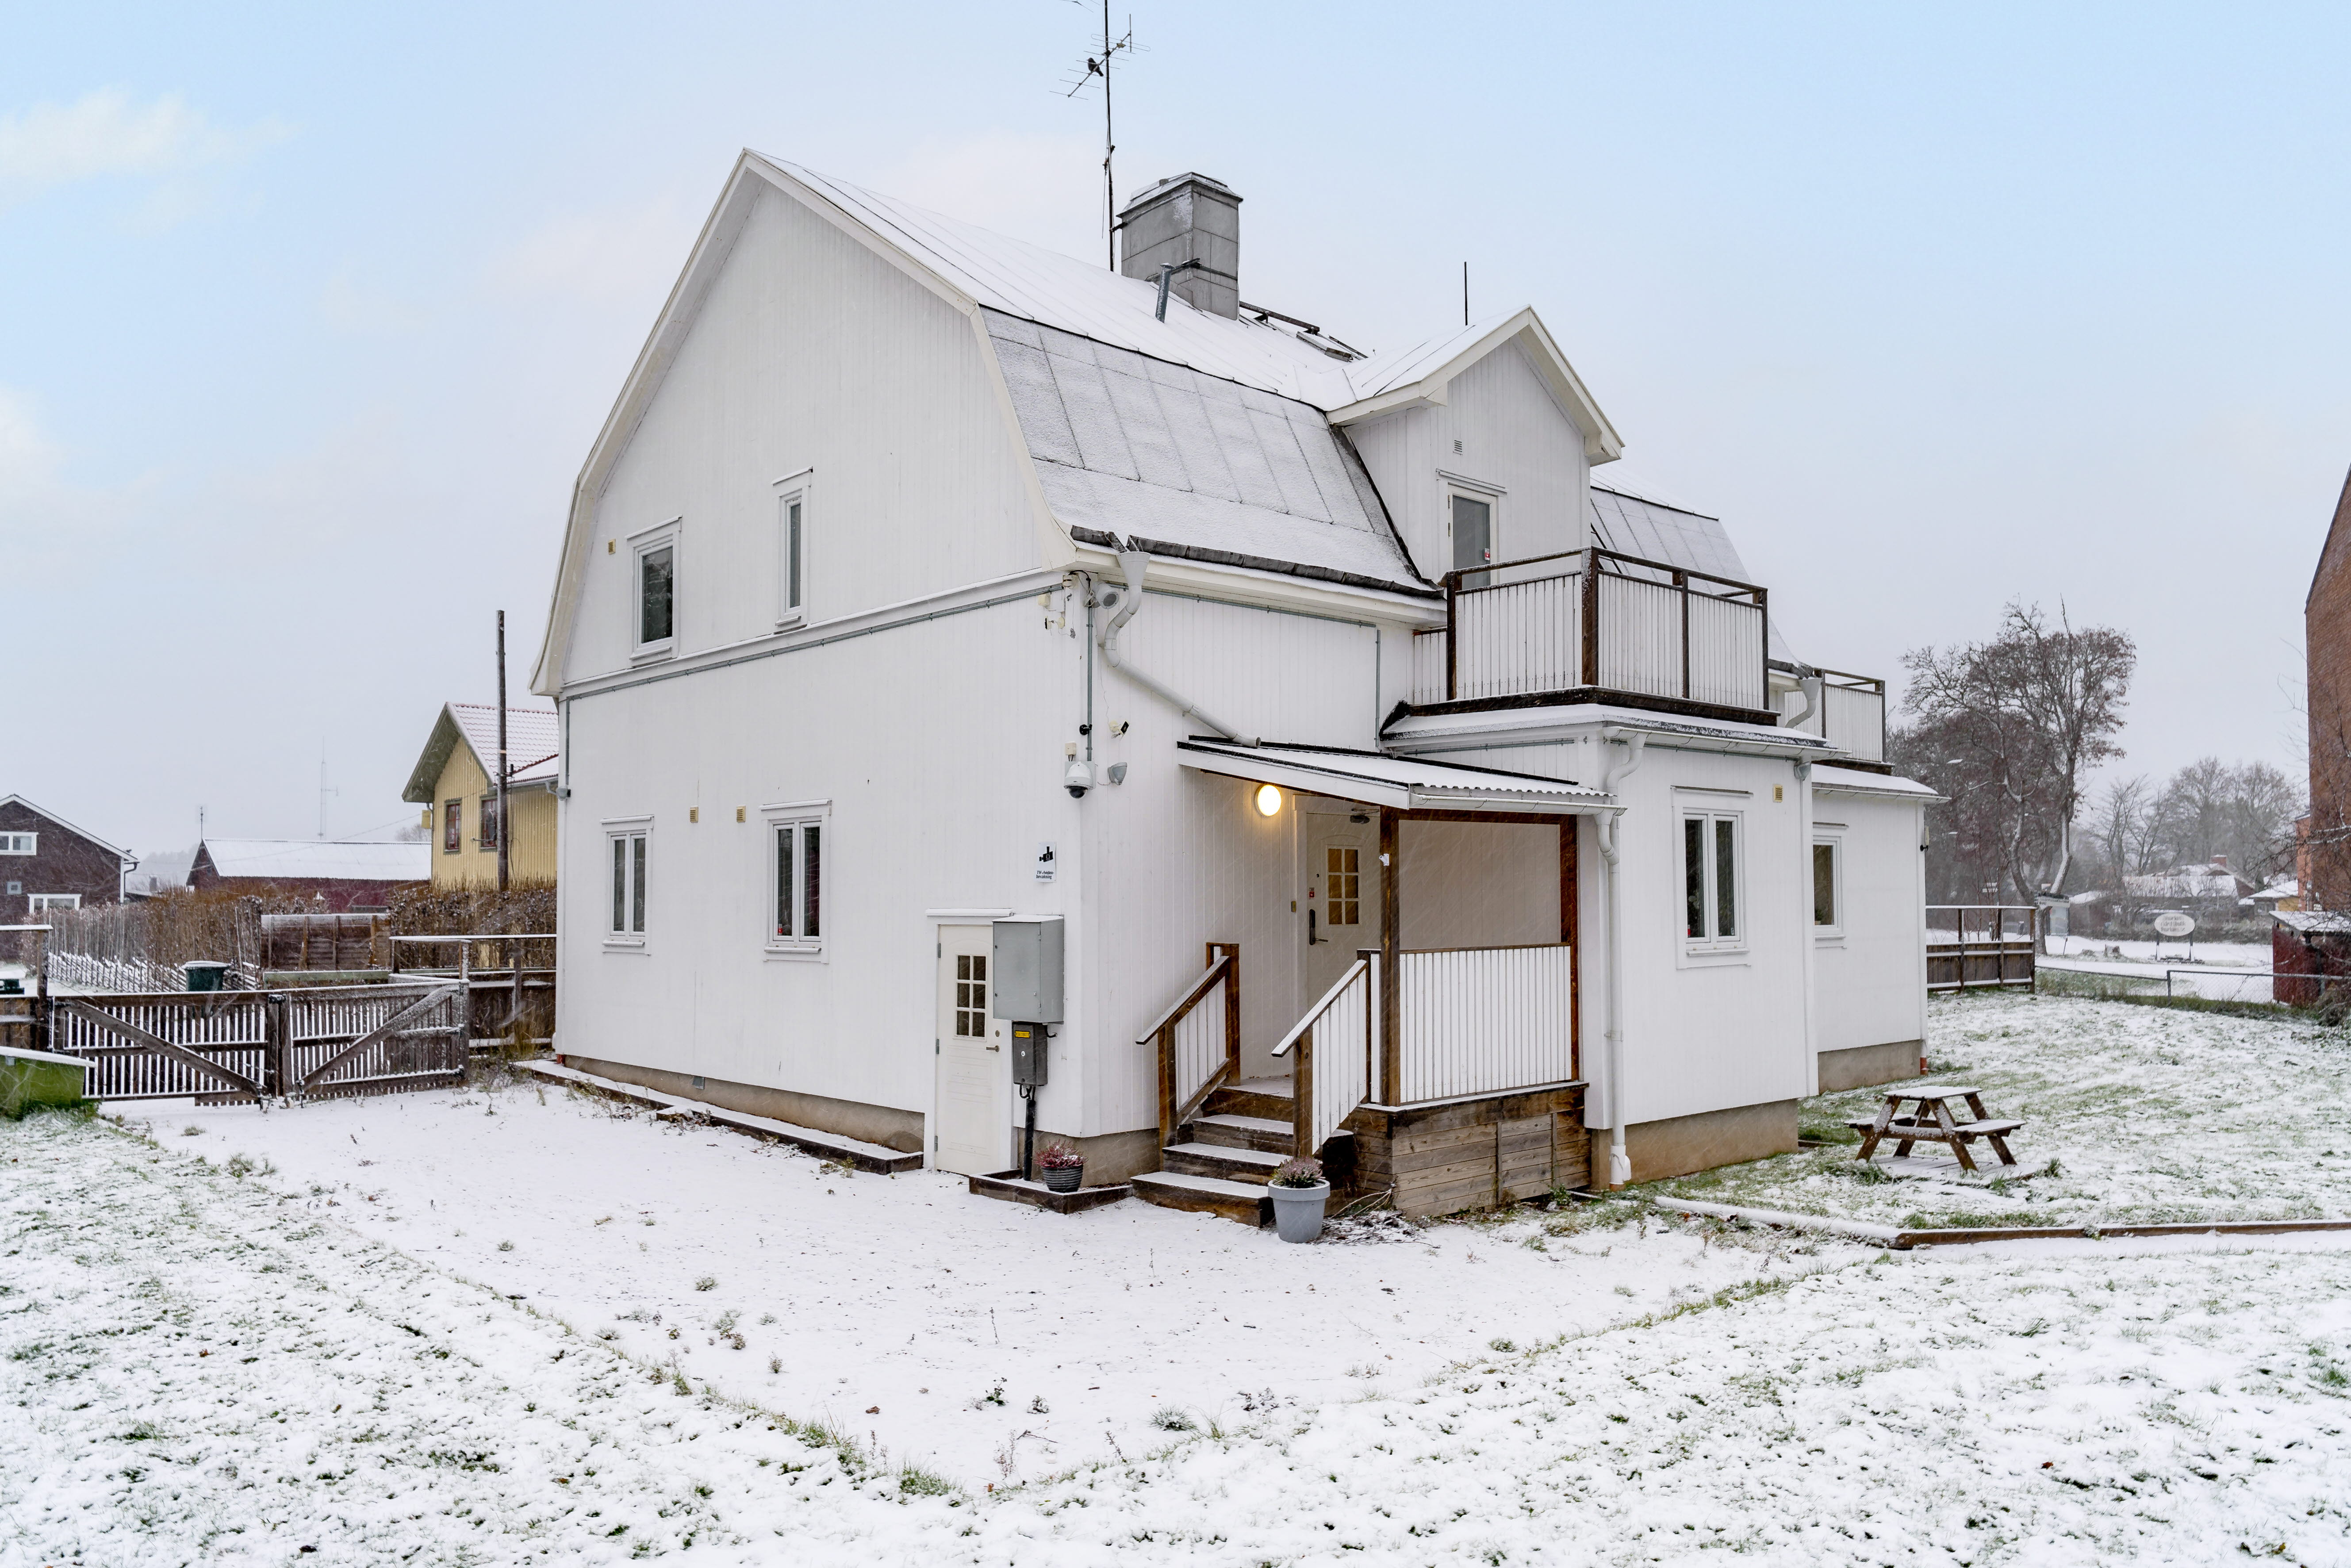 A house in the snow